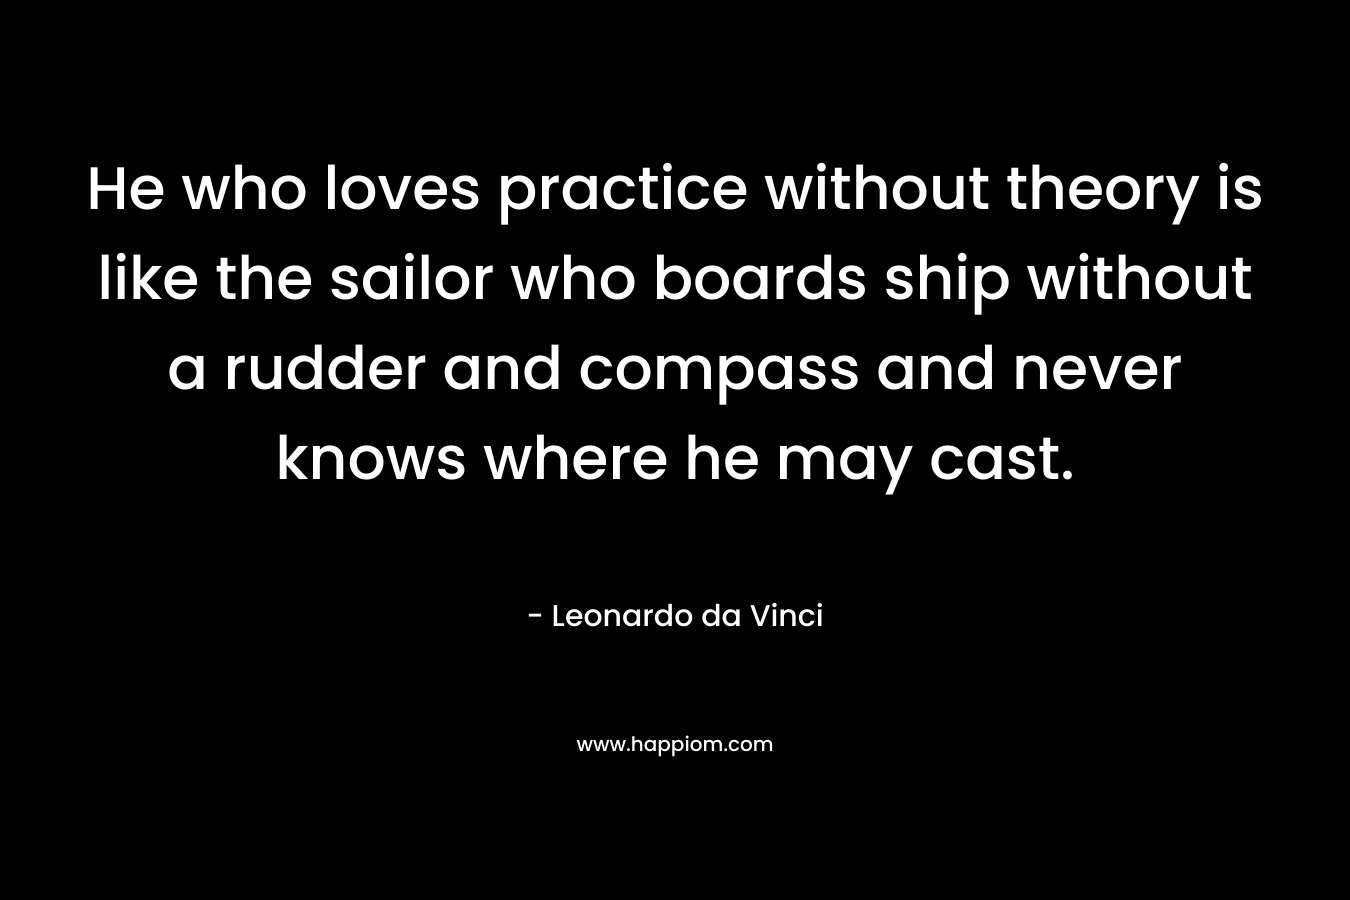 He who loves practice without theory is like the sailor who boards ship without a rudder and compass and never knows where he may cast. – Leonardo da Vinci